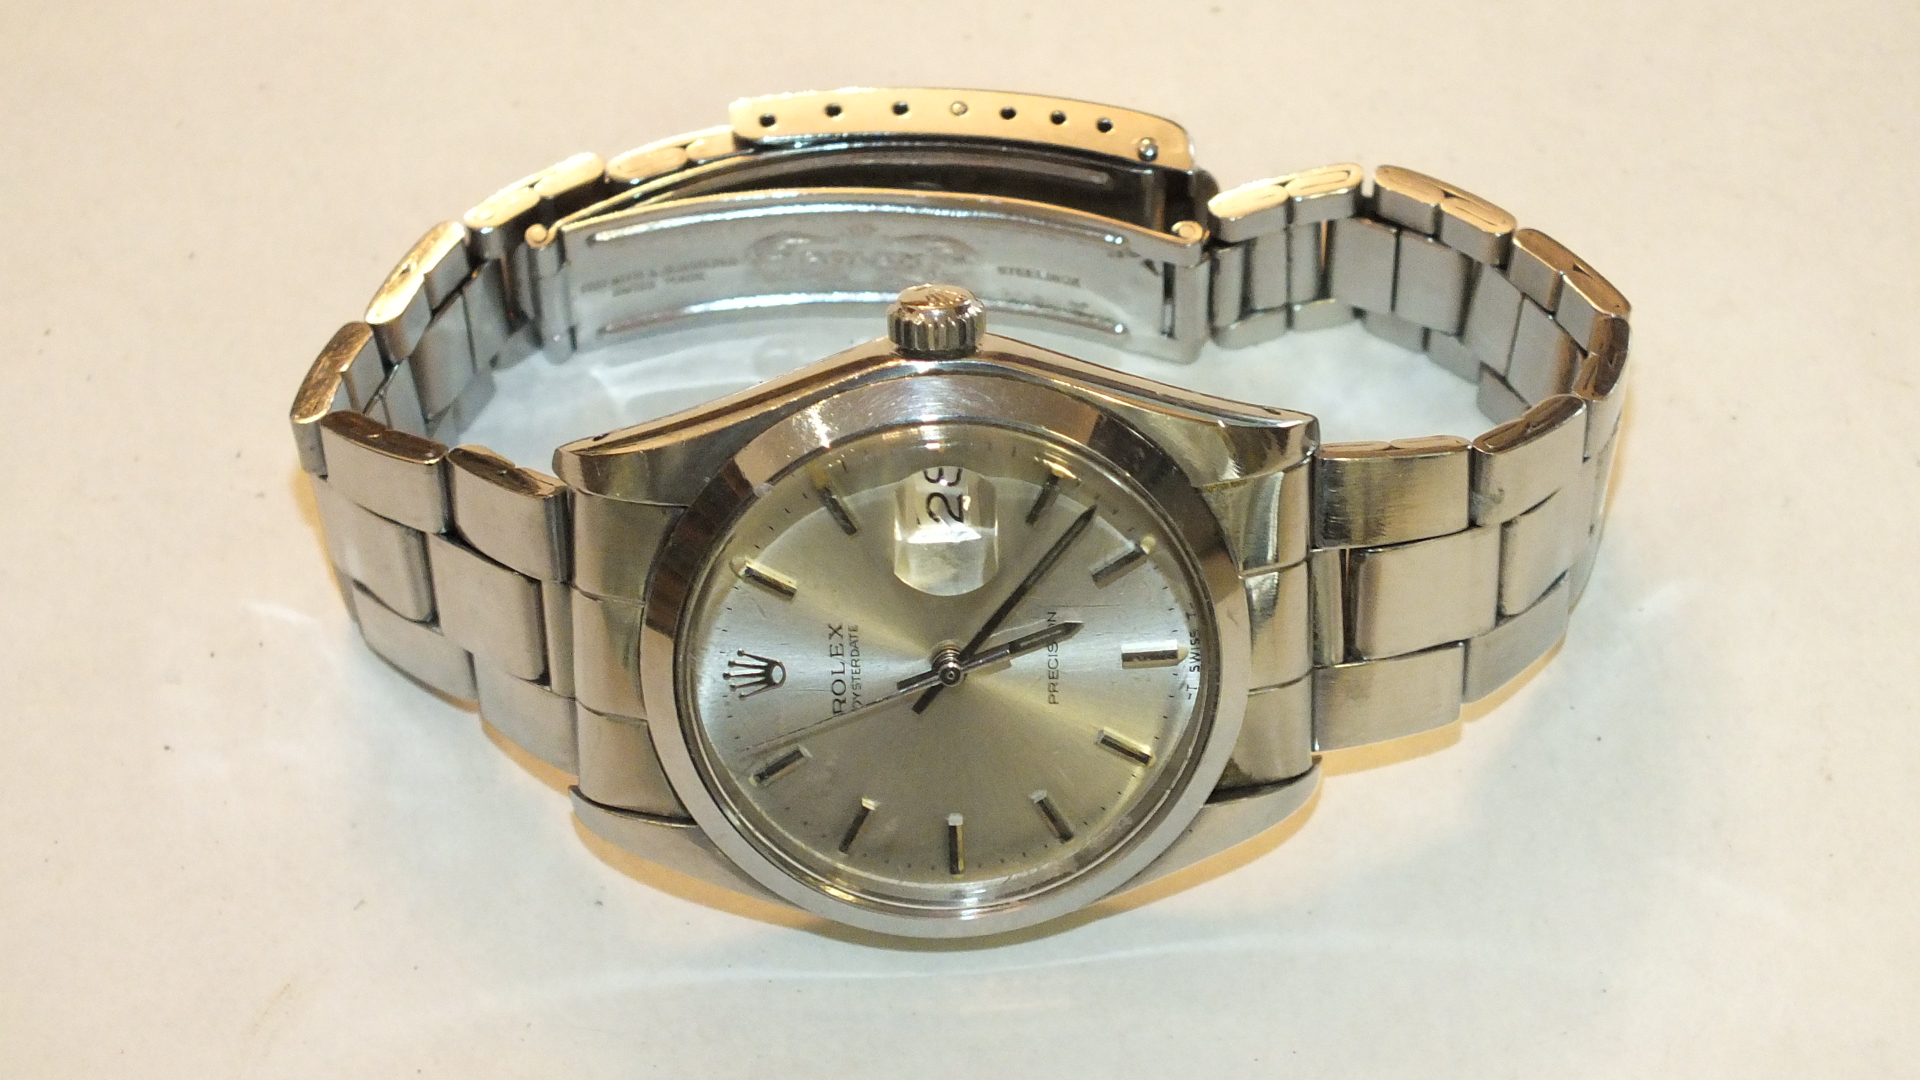 Rolex, Oysterdate Precision stainless steel wrist watch c1972/3, the circular dial with baton - Image 3 of 3